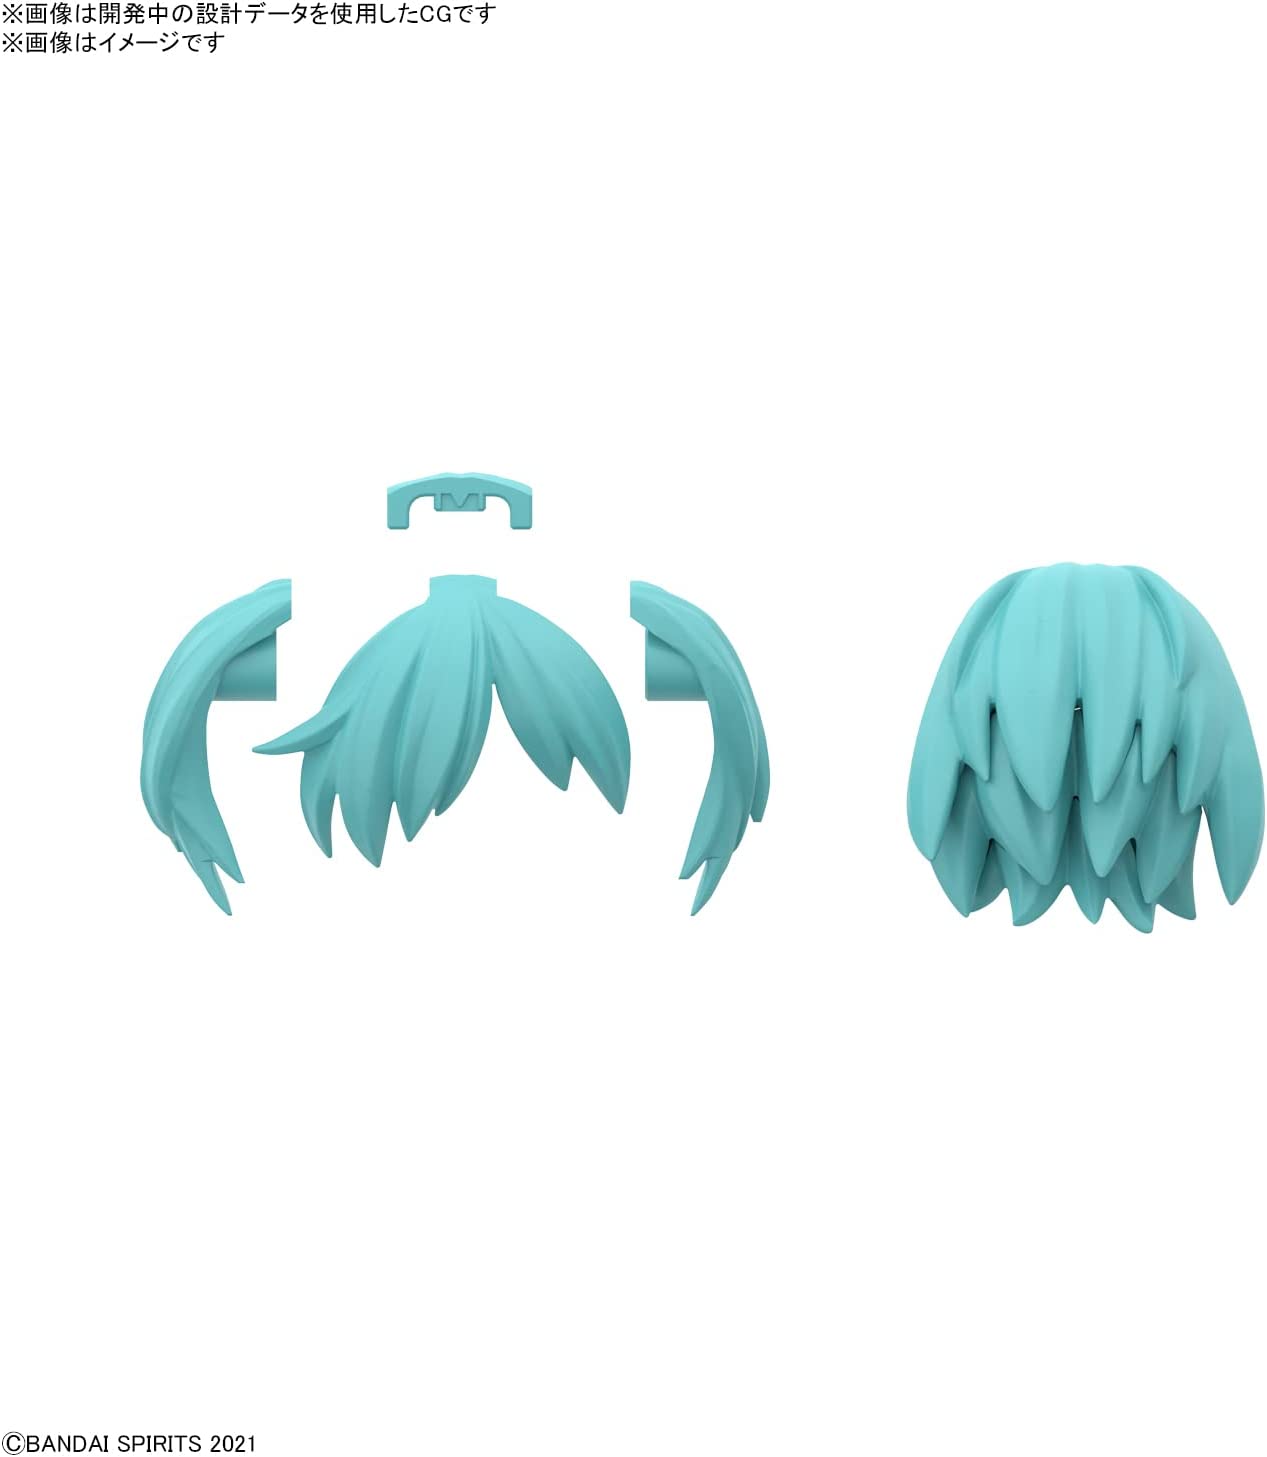 30MS Optional Hairstyle Parts Vol. 5 (Box)